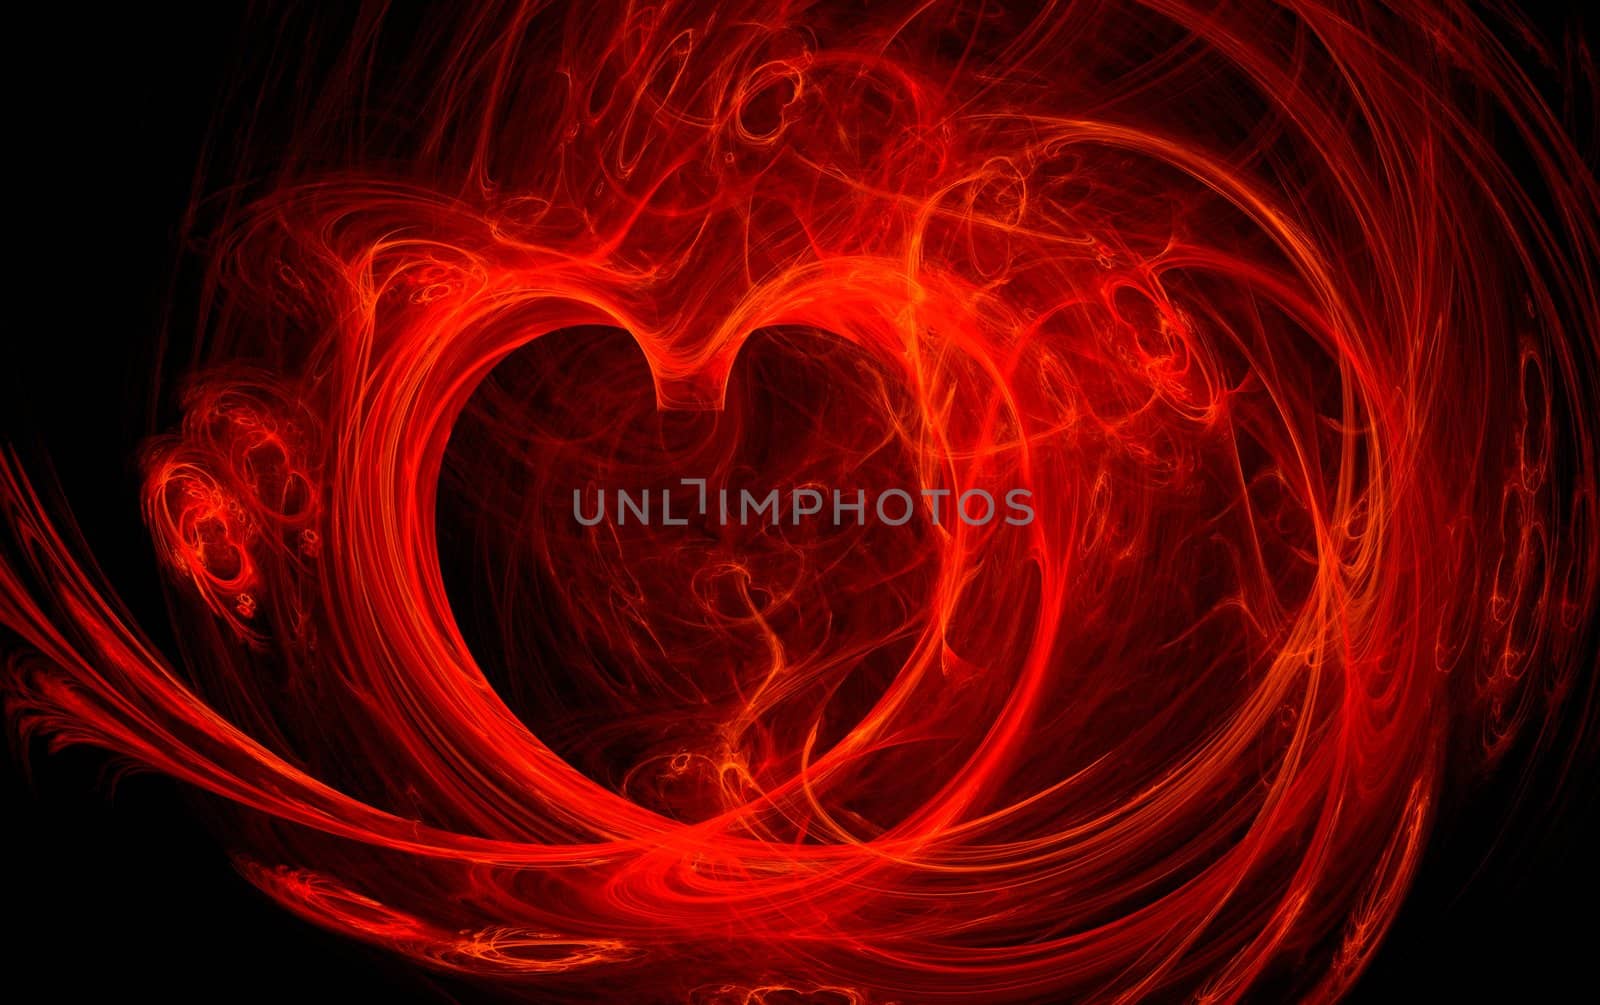 illustration of a red fire heart